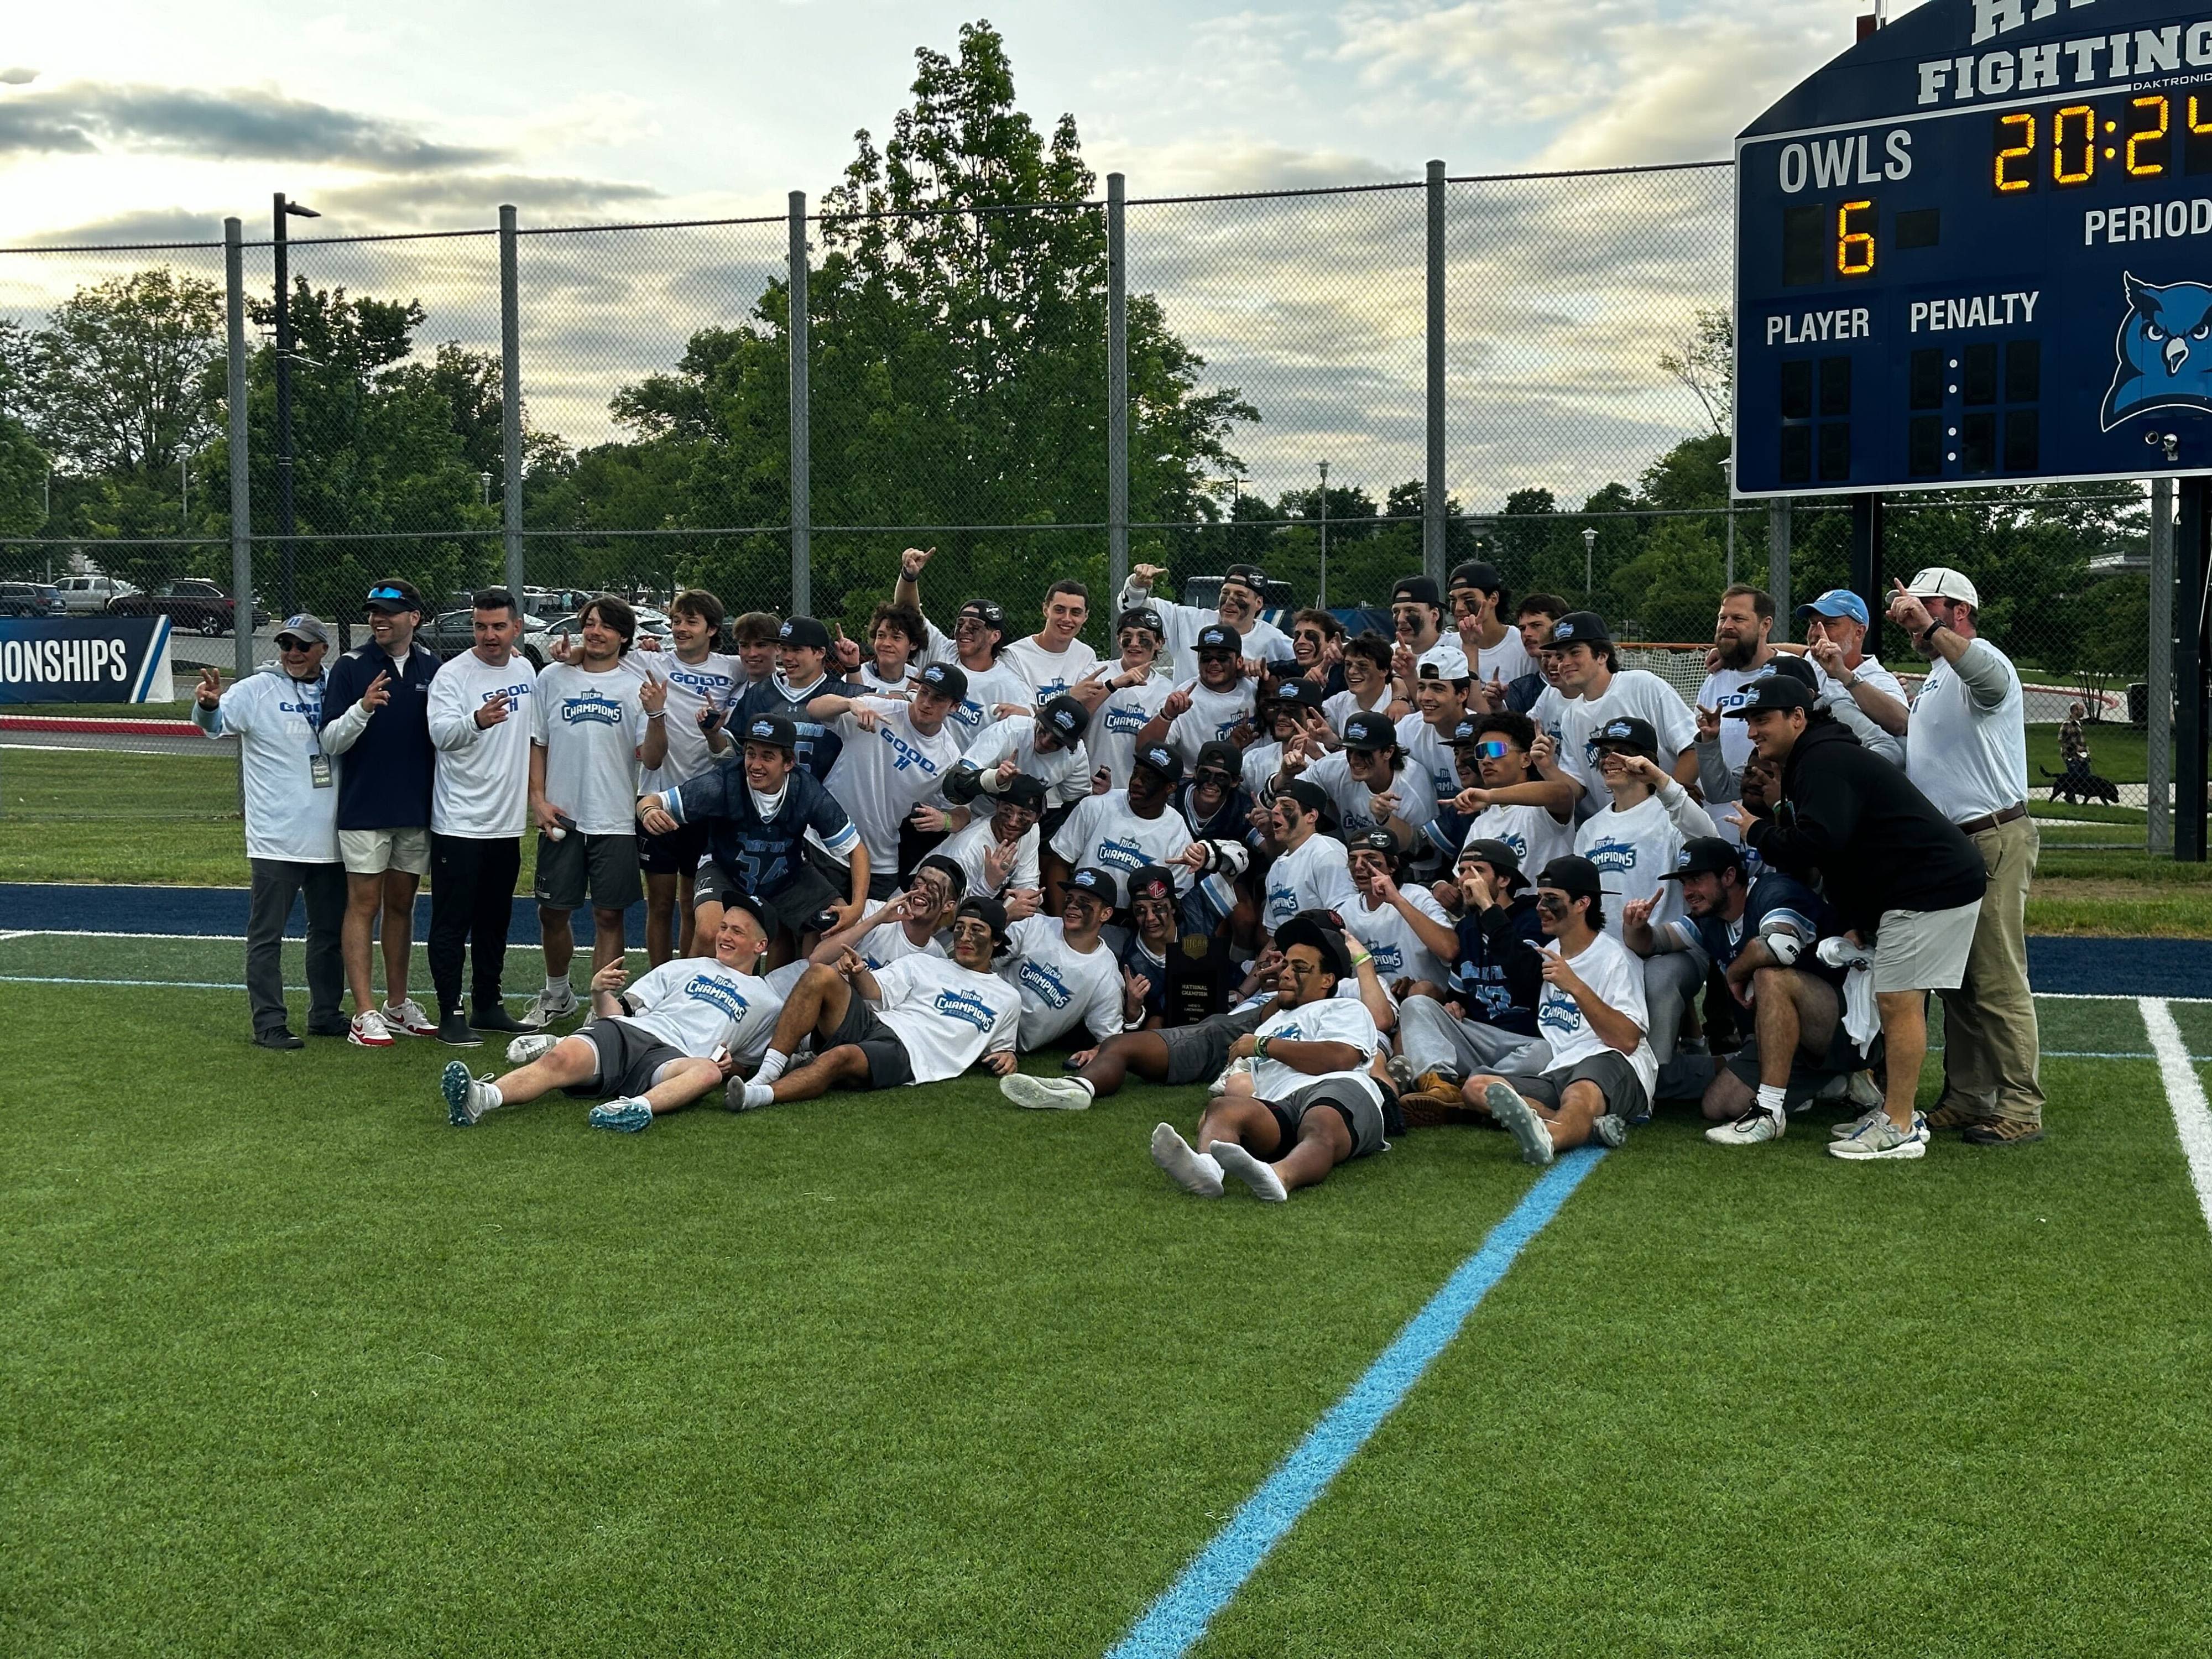 Harford Community College defends NJCAA men’s lacrosse national title, beating CCBC Essex, 16-6